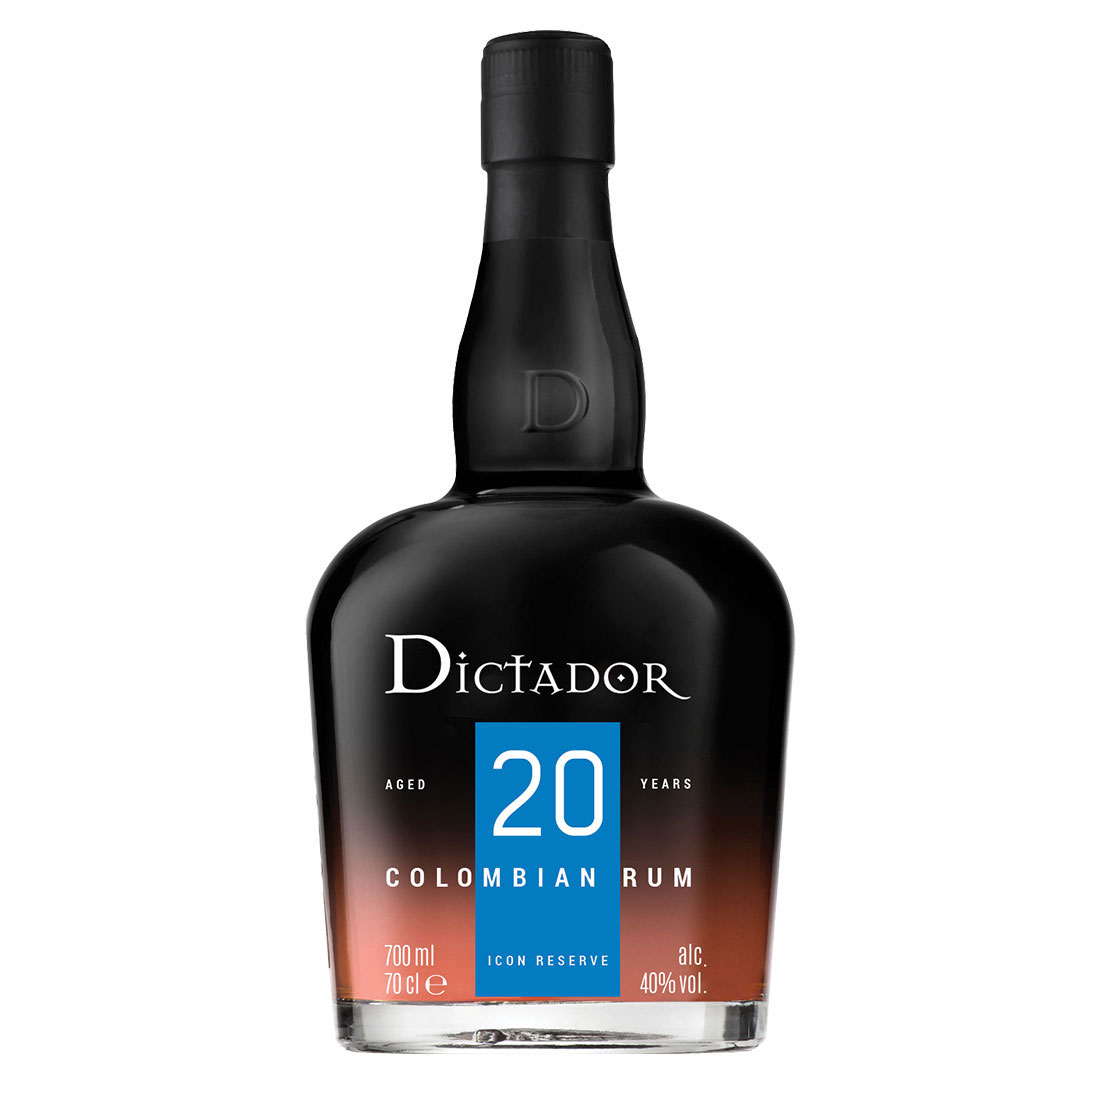 LB_Bottle-Dictador-20-years-Old-Rum---New-Bottle